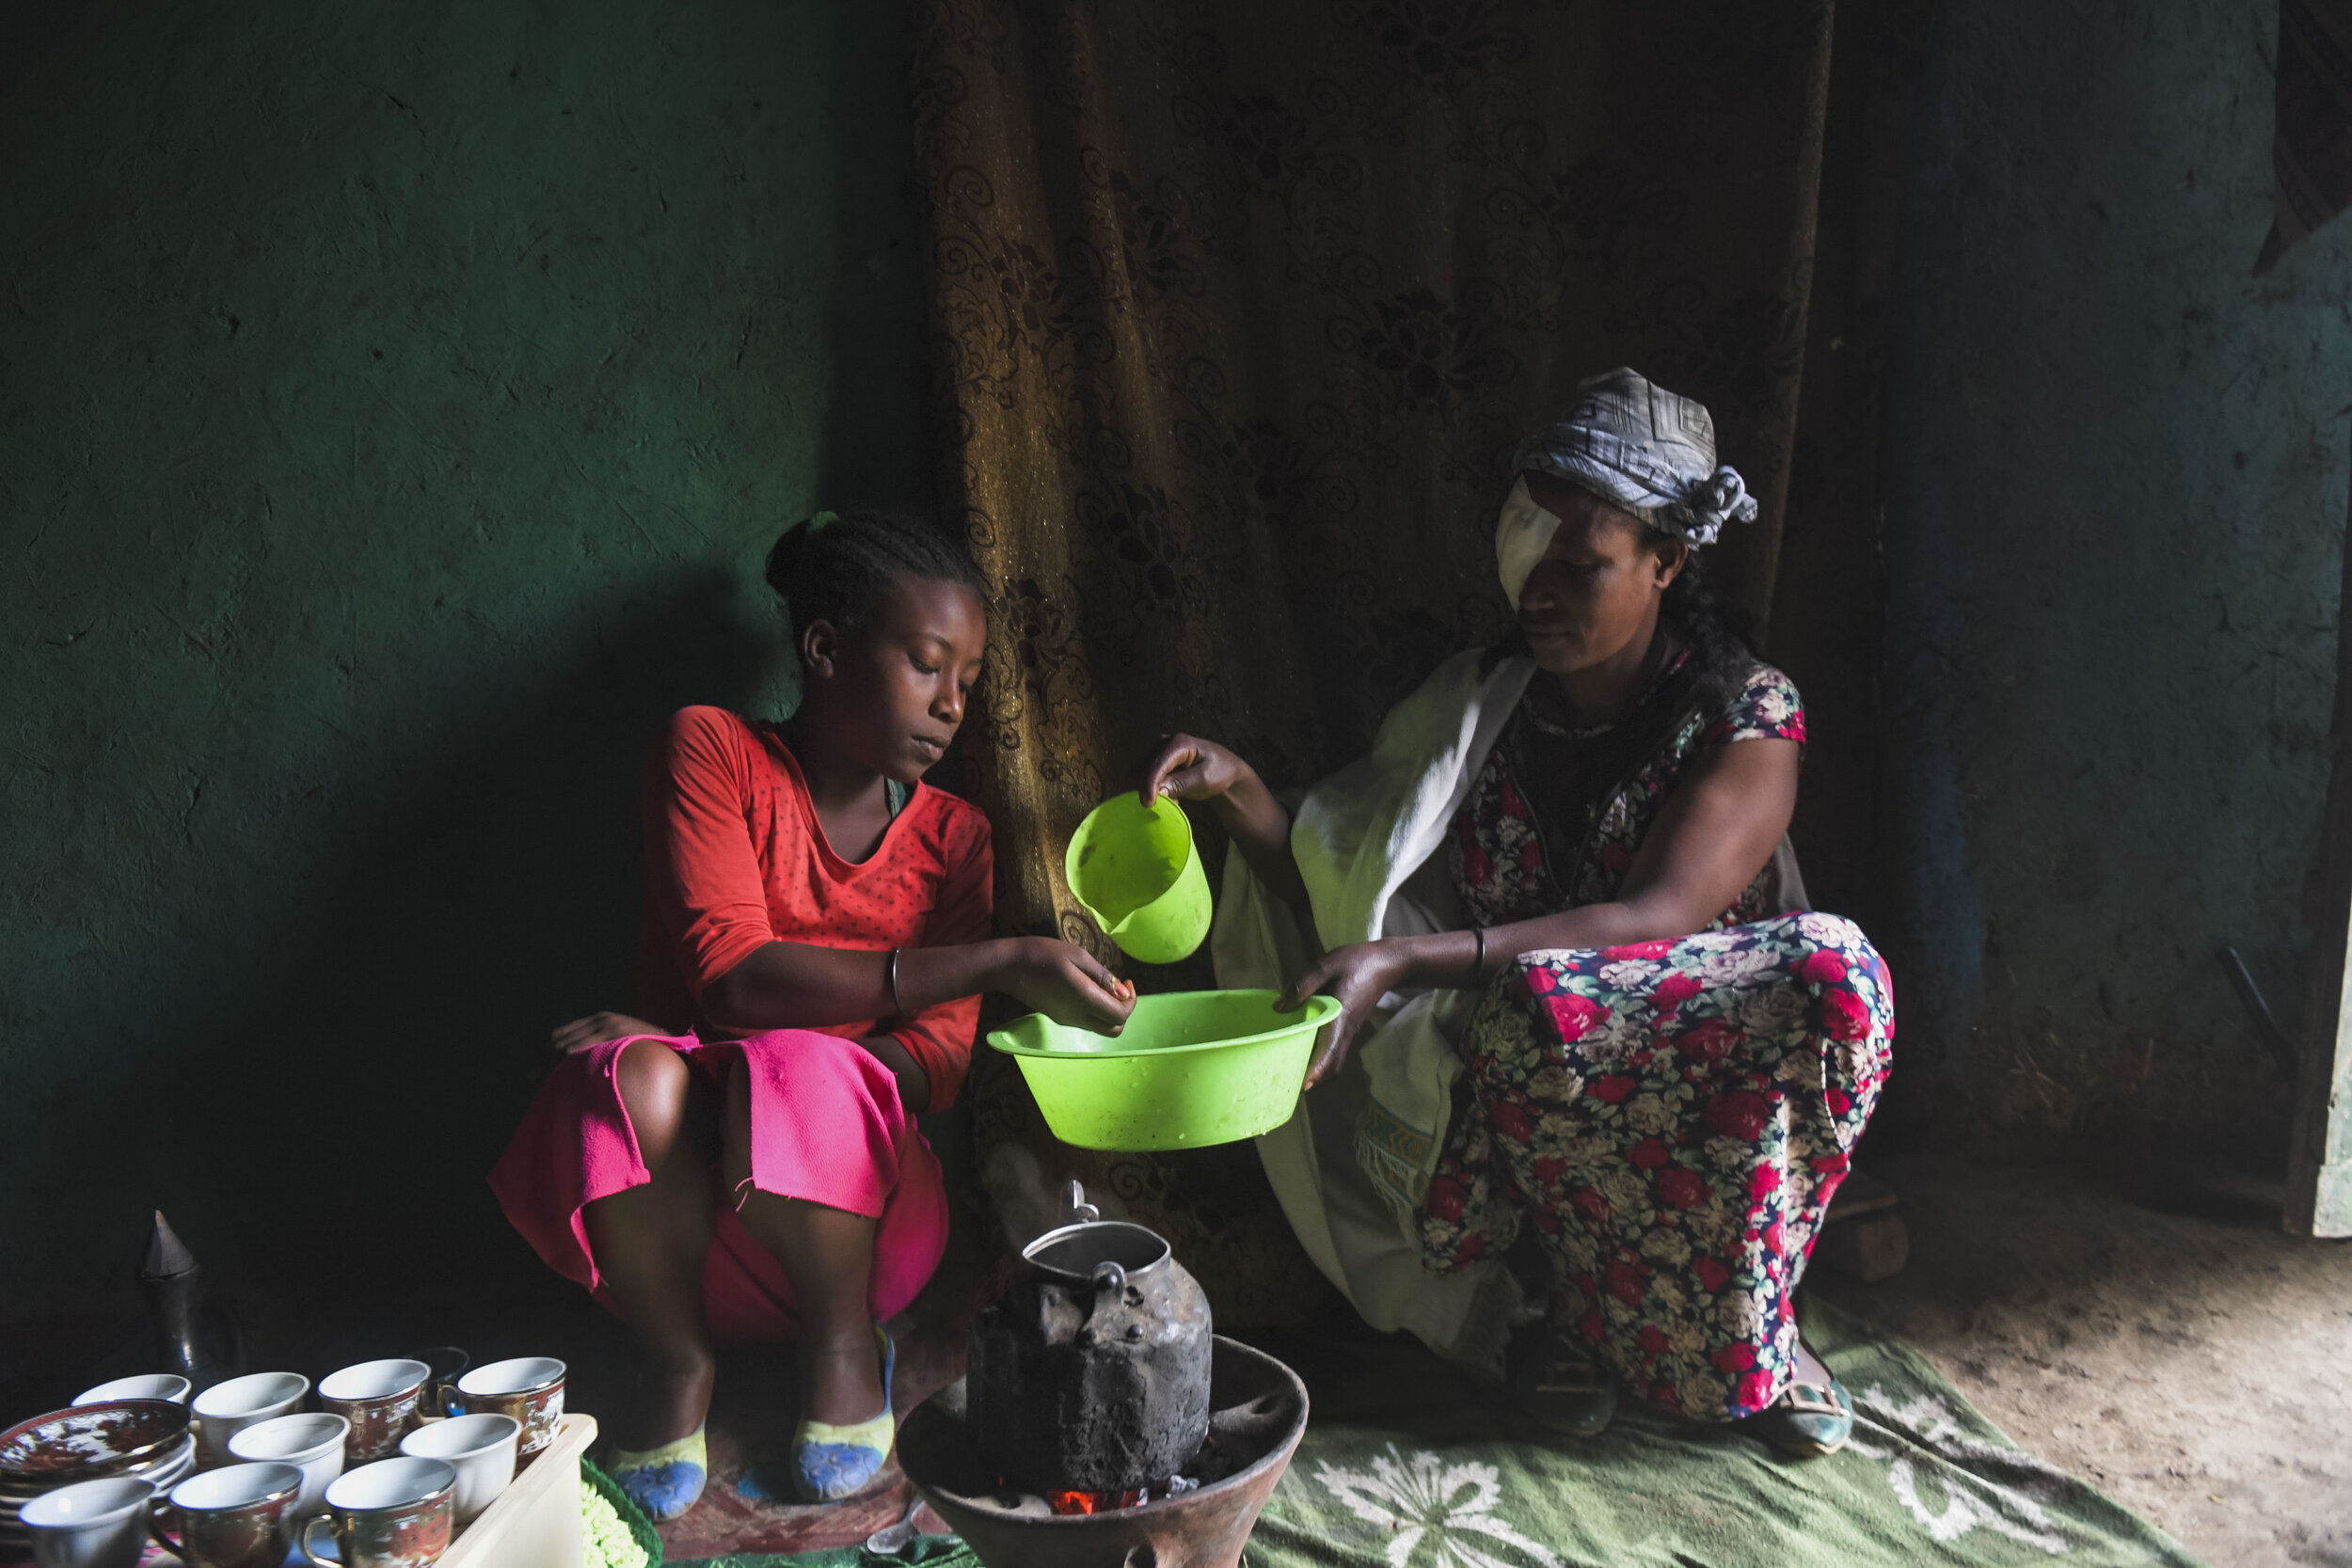  Asnaku Tufa washes dishes with her daughter while at home after having corrective surgery for Trachomatous Trichiasis (TT). During the testing Tufa was informed that TT is not a hereditary disease and that the precautions she has been taking at home